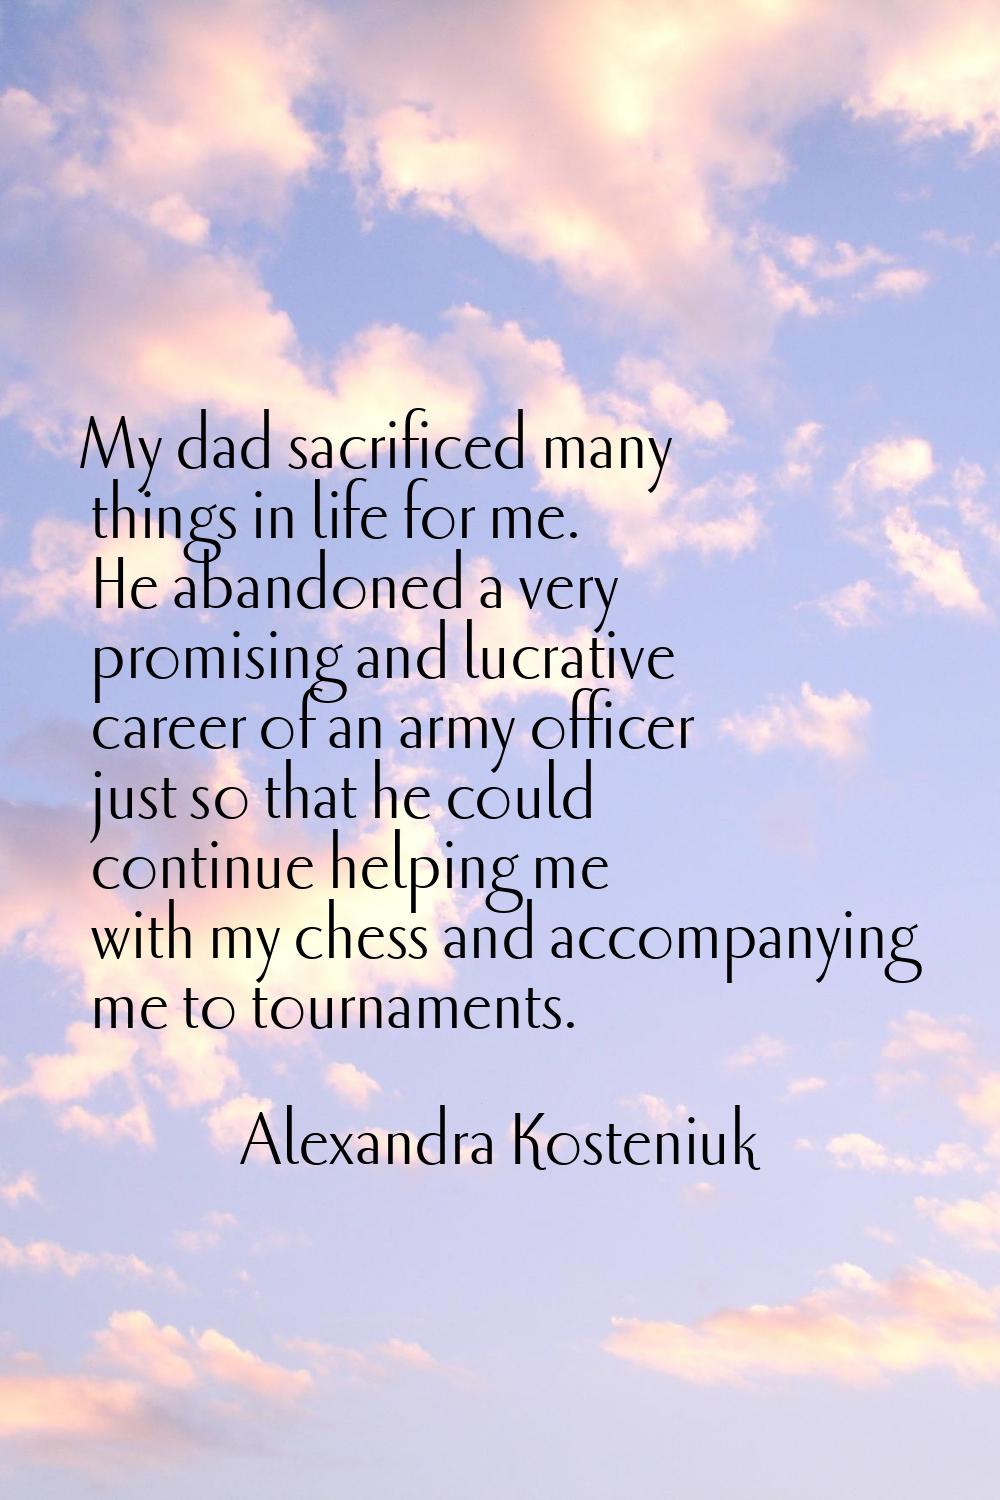 My dad sacrificed many things in life for me. He abandoned a very promising and lucrative career of